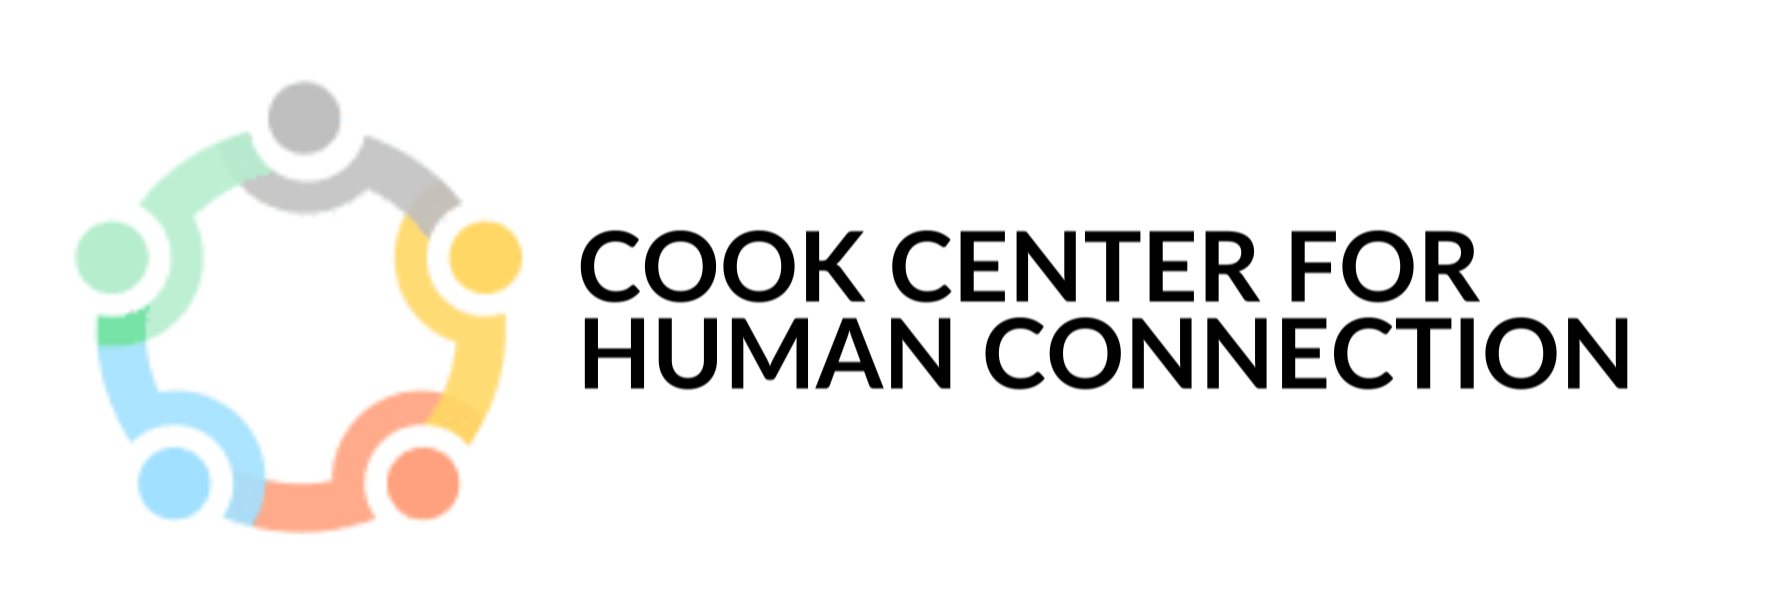 Cook Center for Human Connection logo